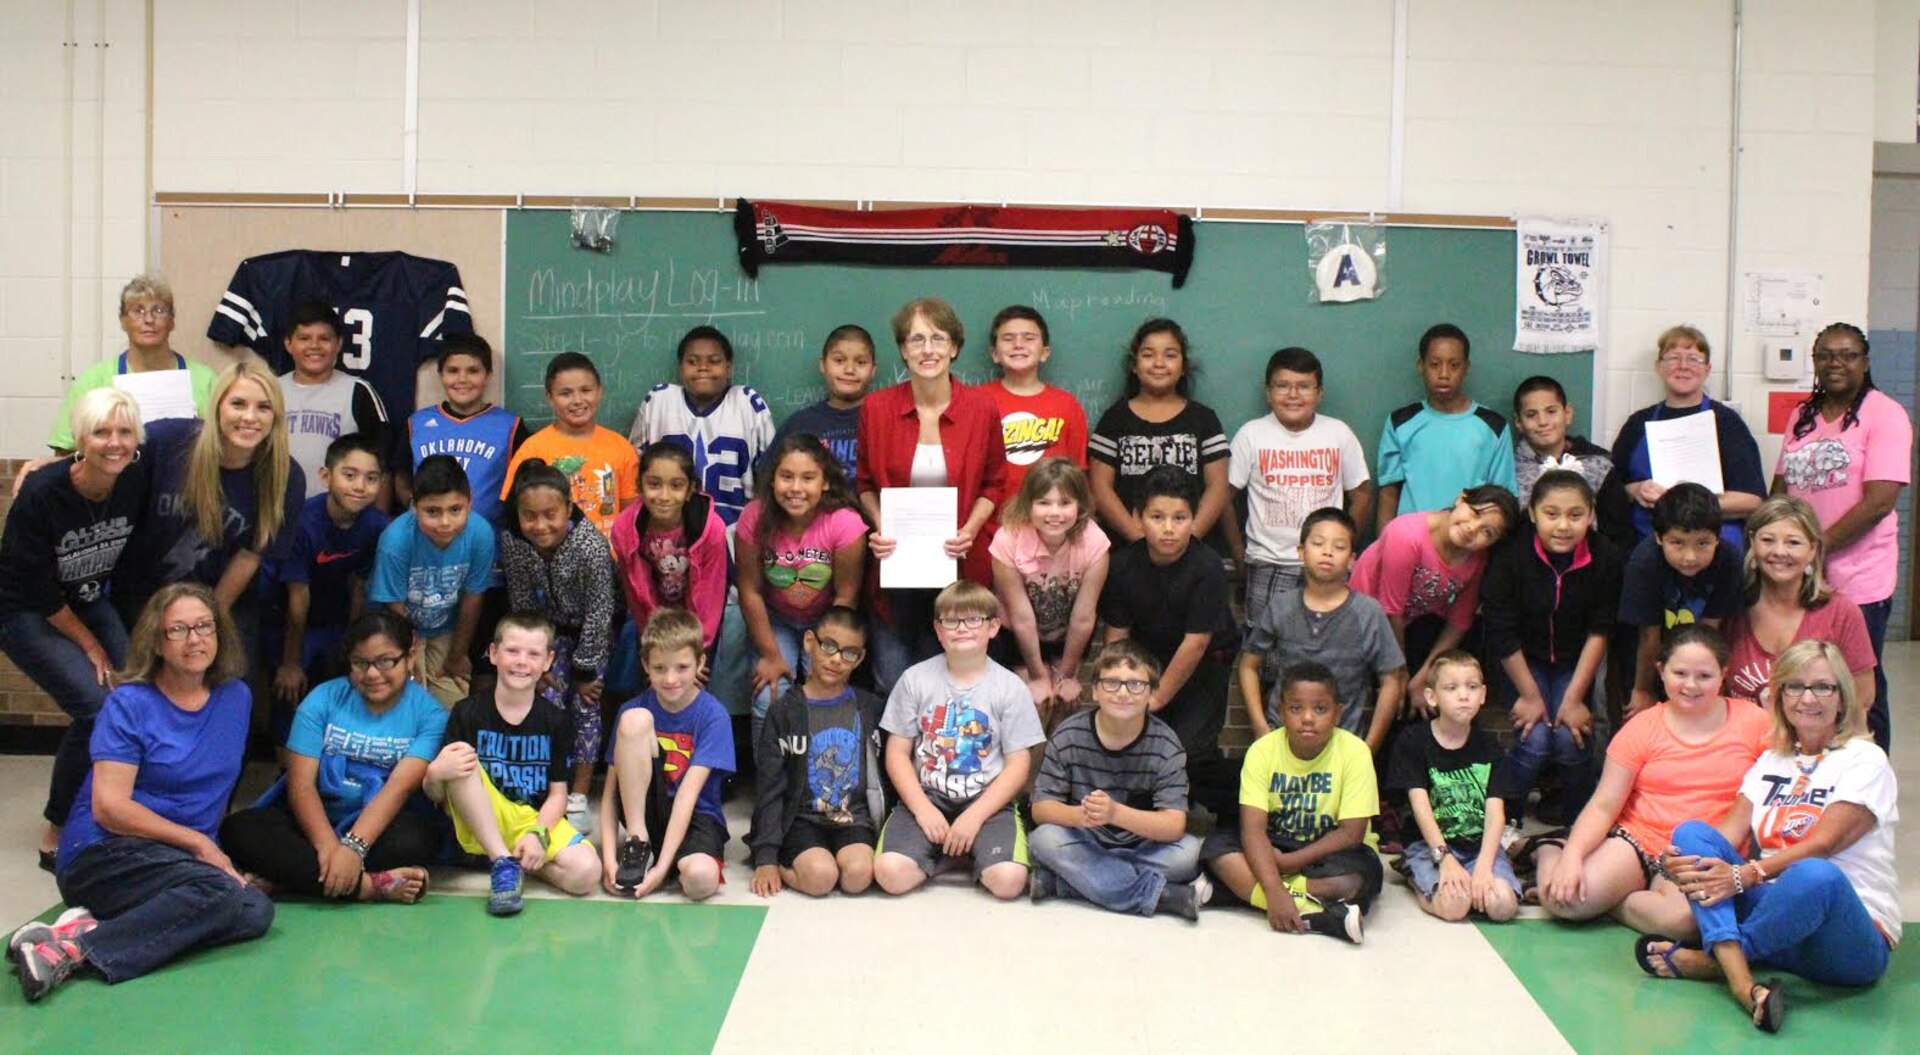 Third graders and staff at Eugene Field Elementary School in Oklahoma pose with Sabina Garrett, child nutrition program director for Altus Public Schools, after thanking her June 14 for providing them nutritious meals for their summer school program. DLA Troop Support's Subsistence supply chain provides produce to schools in 48 states in partnership with the U.S Department of Agriculture.